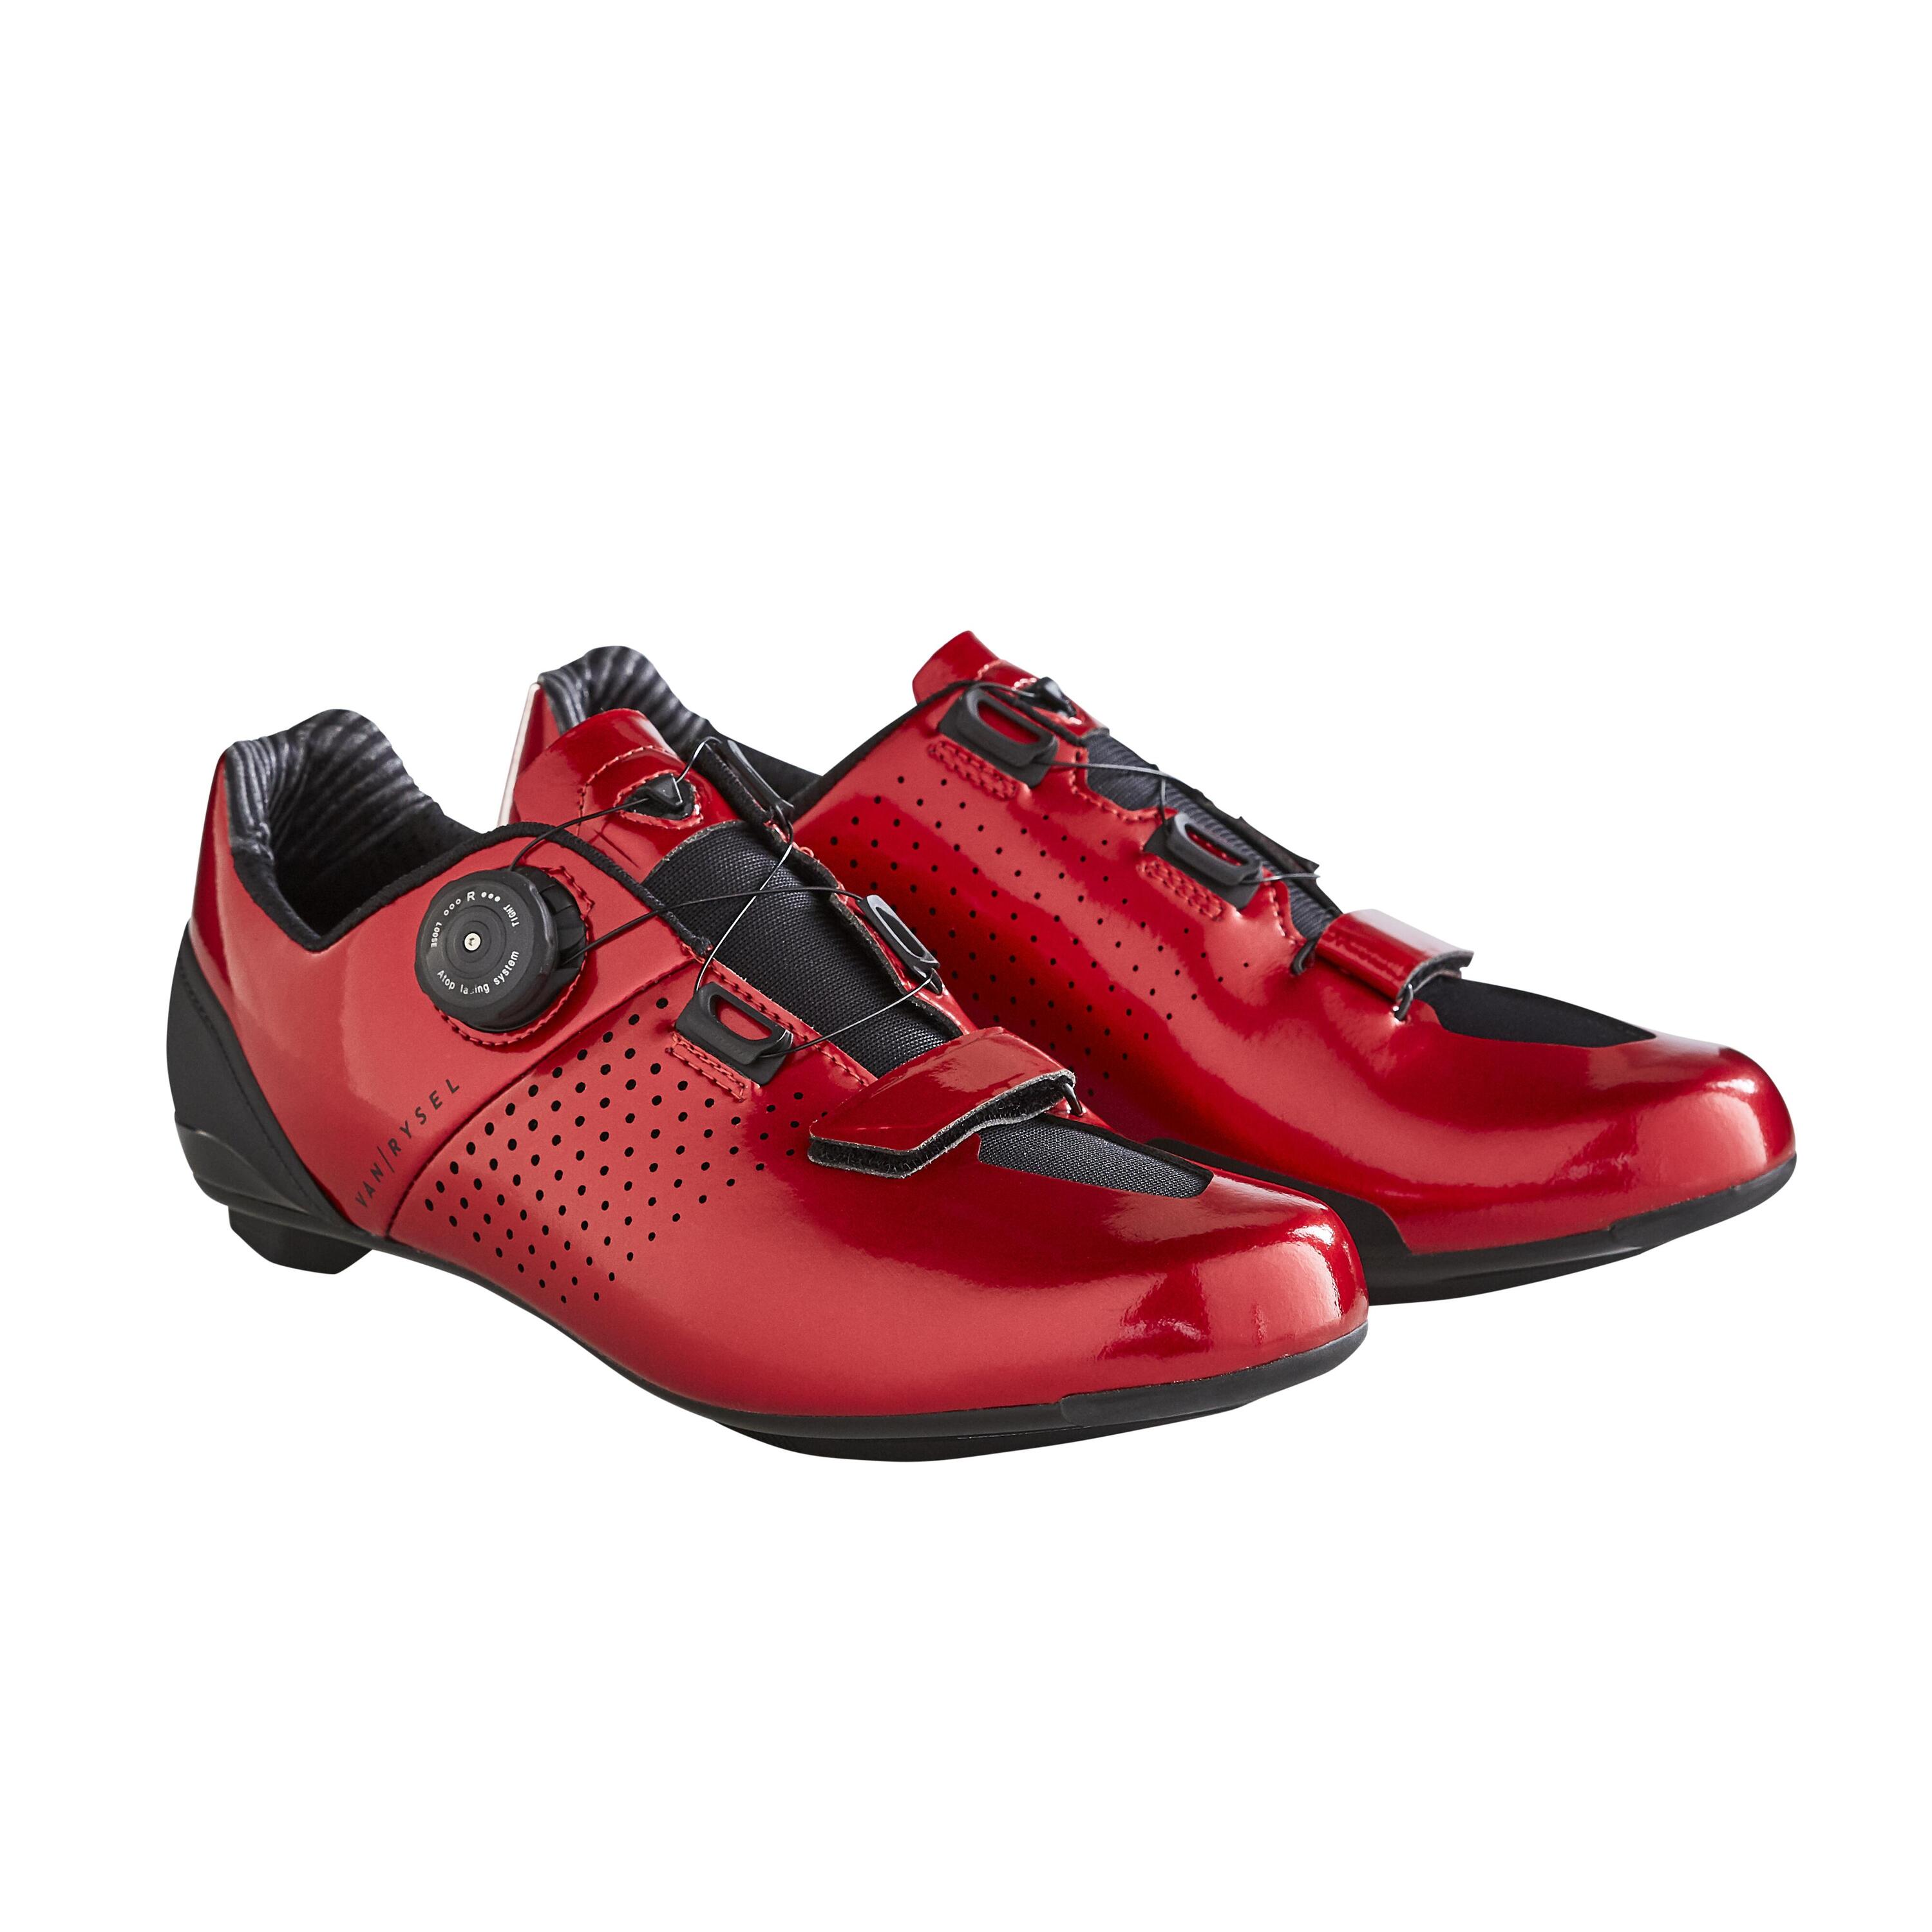 VAN RYSEL RoadR 520 Carbon Road Cycling Shoes - Red